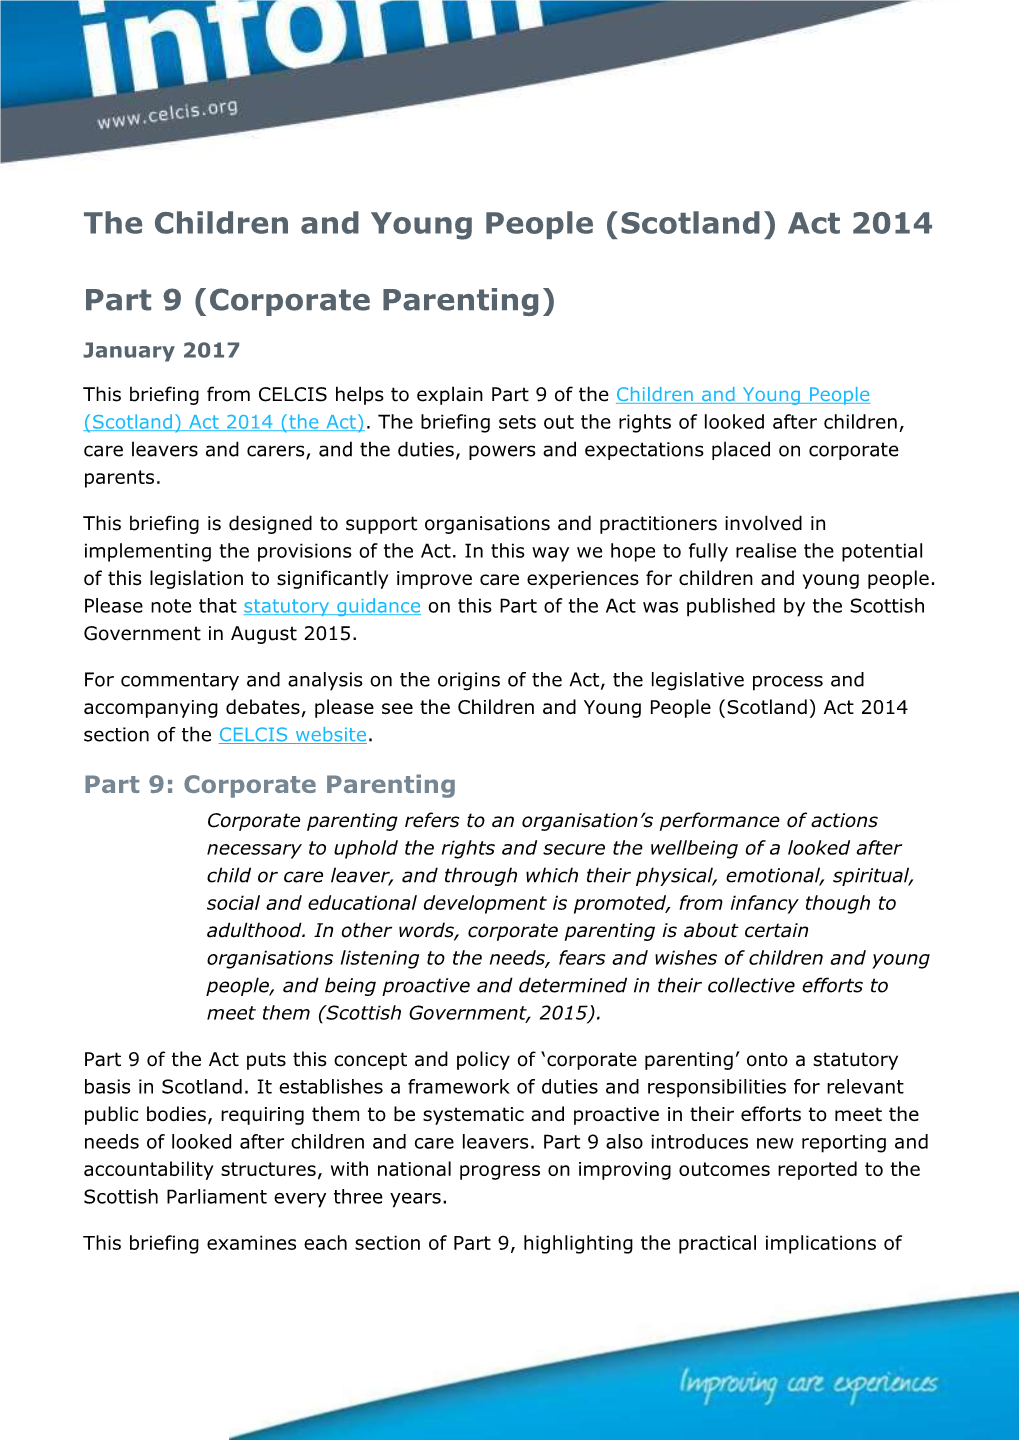 The Children and Young People (Scotland) Act 2014